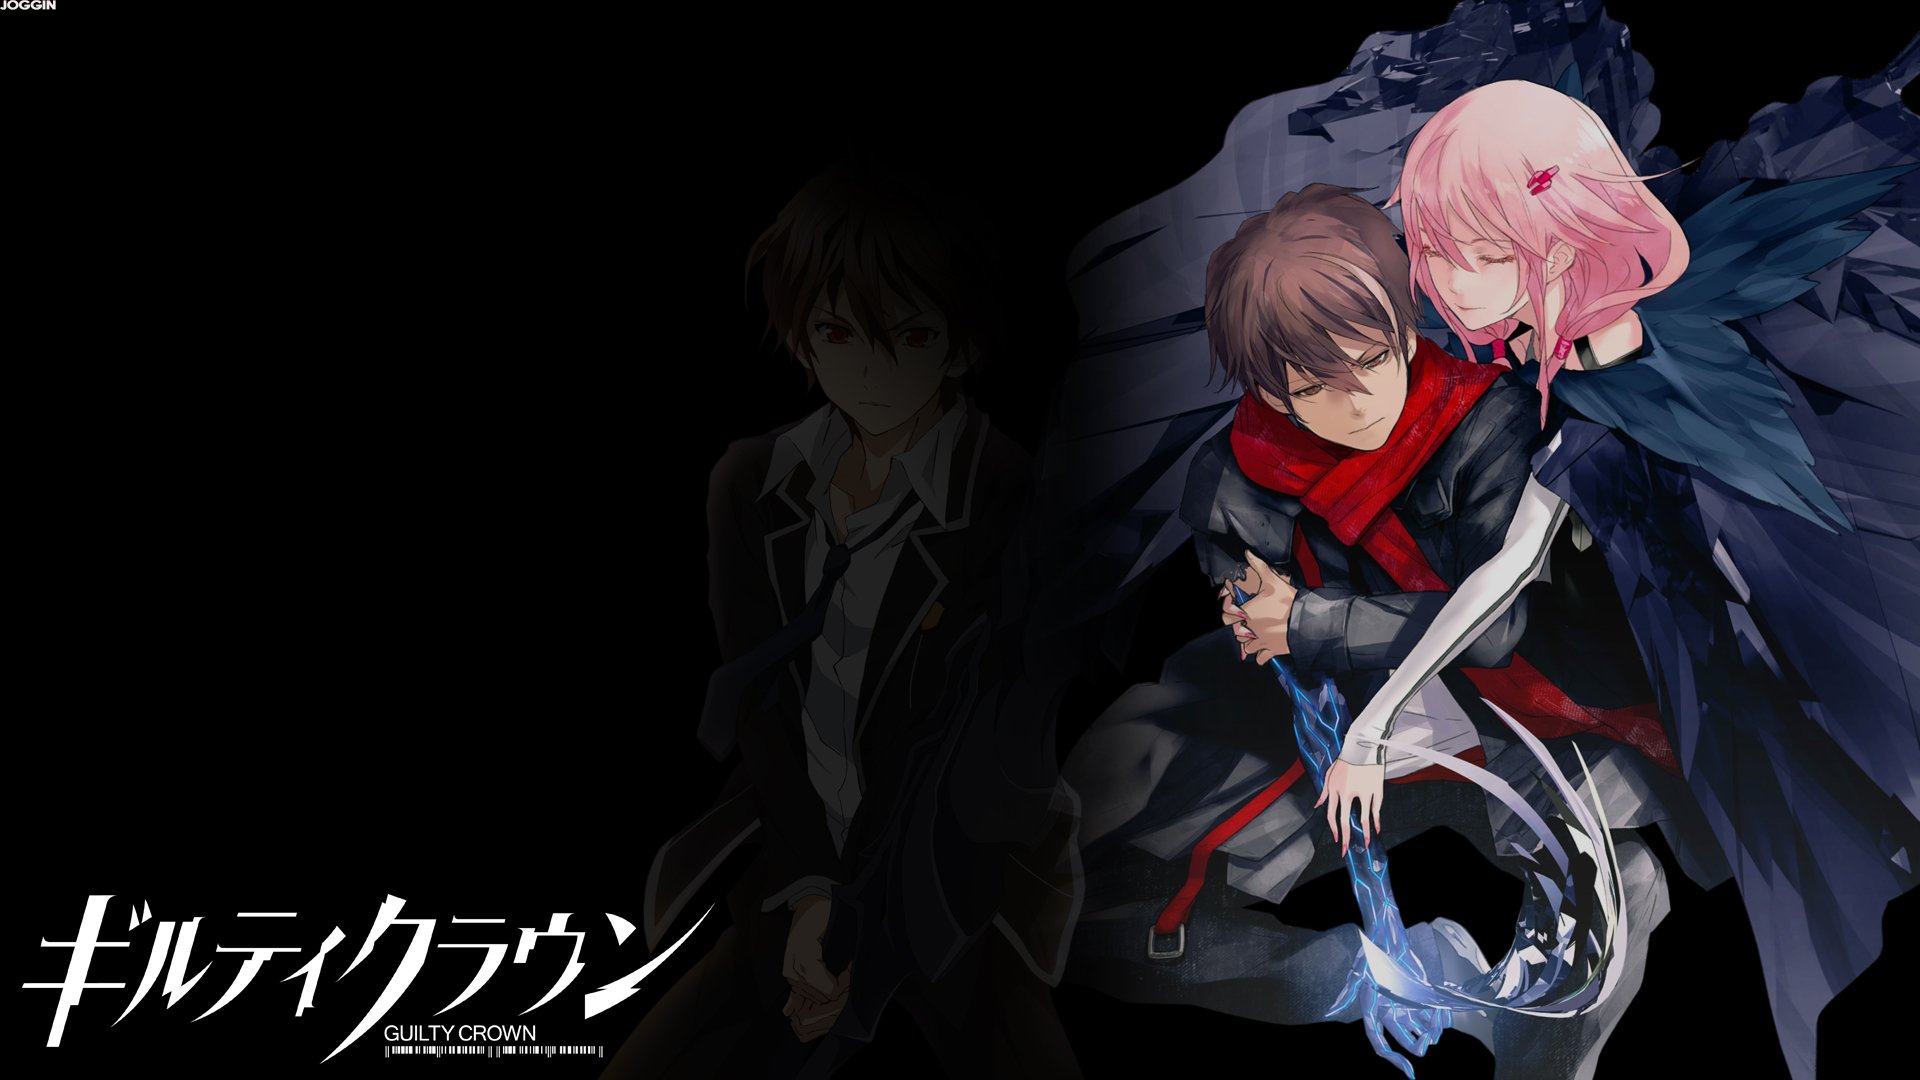 301 Guilty Crown Hd Wallpapers Background Images Wallpaper Abyss Images, Photos, Reviews